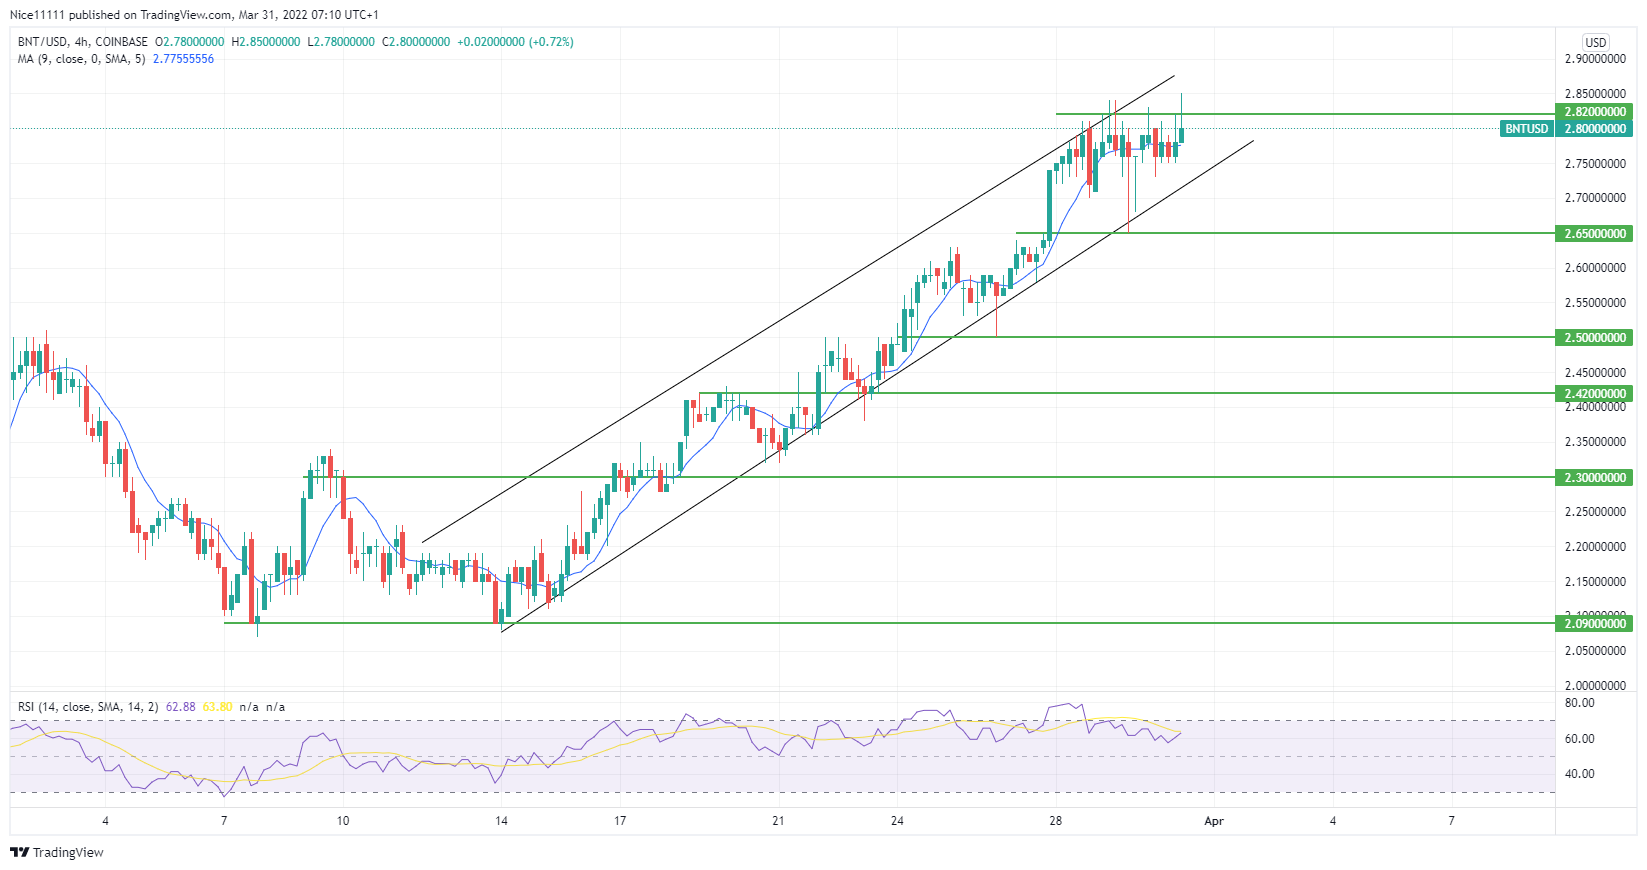 Bancor (BNTUSD) Hit $2.820 With a Pullback and Expansion Tactics in an Ascending Channel.